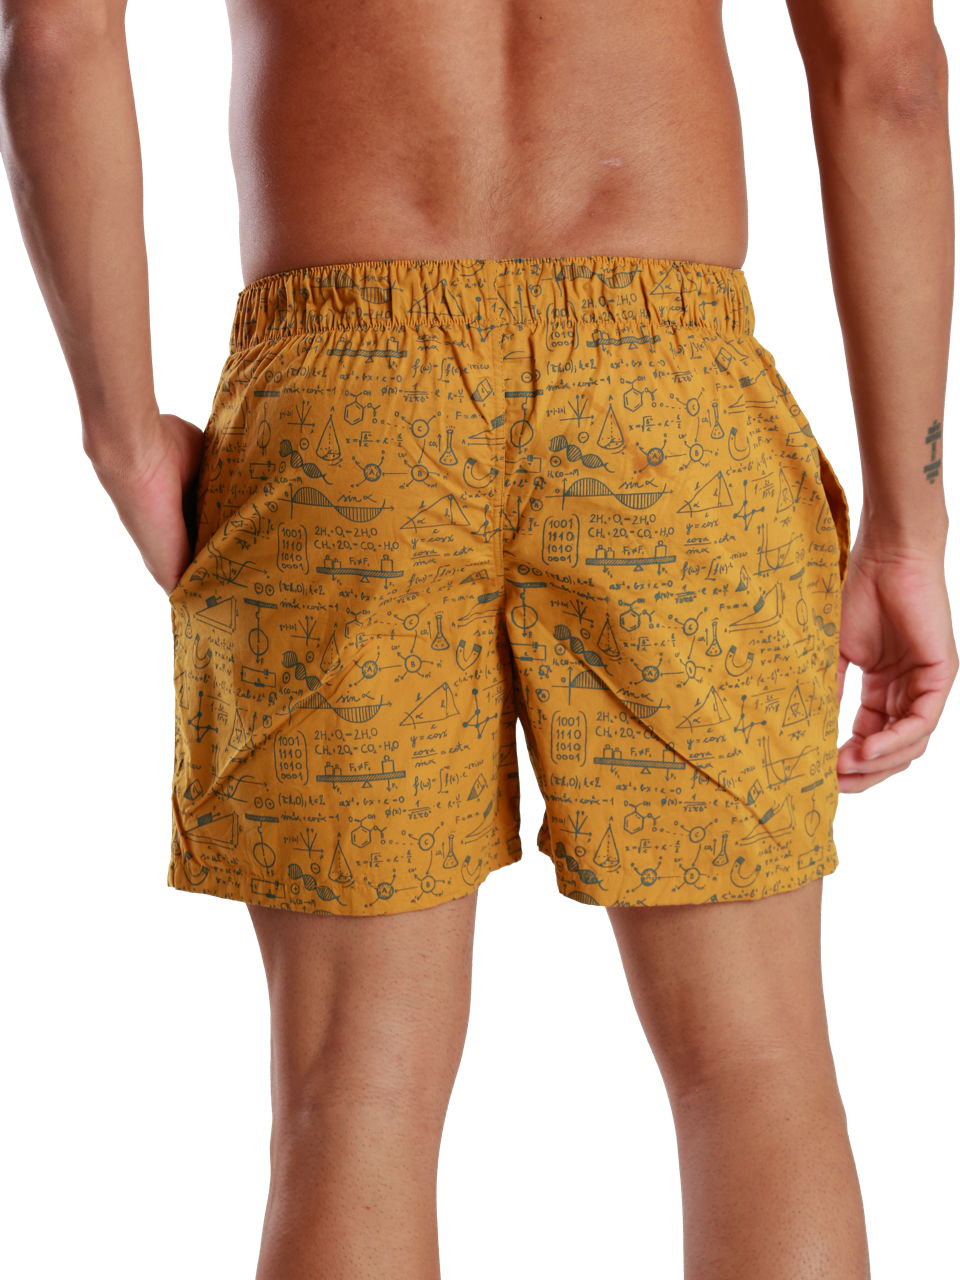 All-Day Boxer Shorts 2-Plain & 1-Printed (Pack of 3)